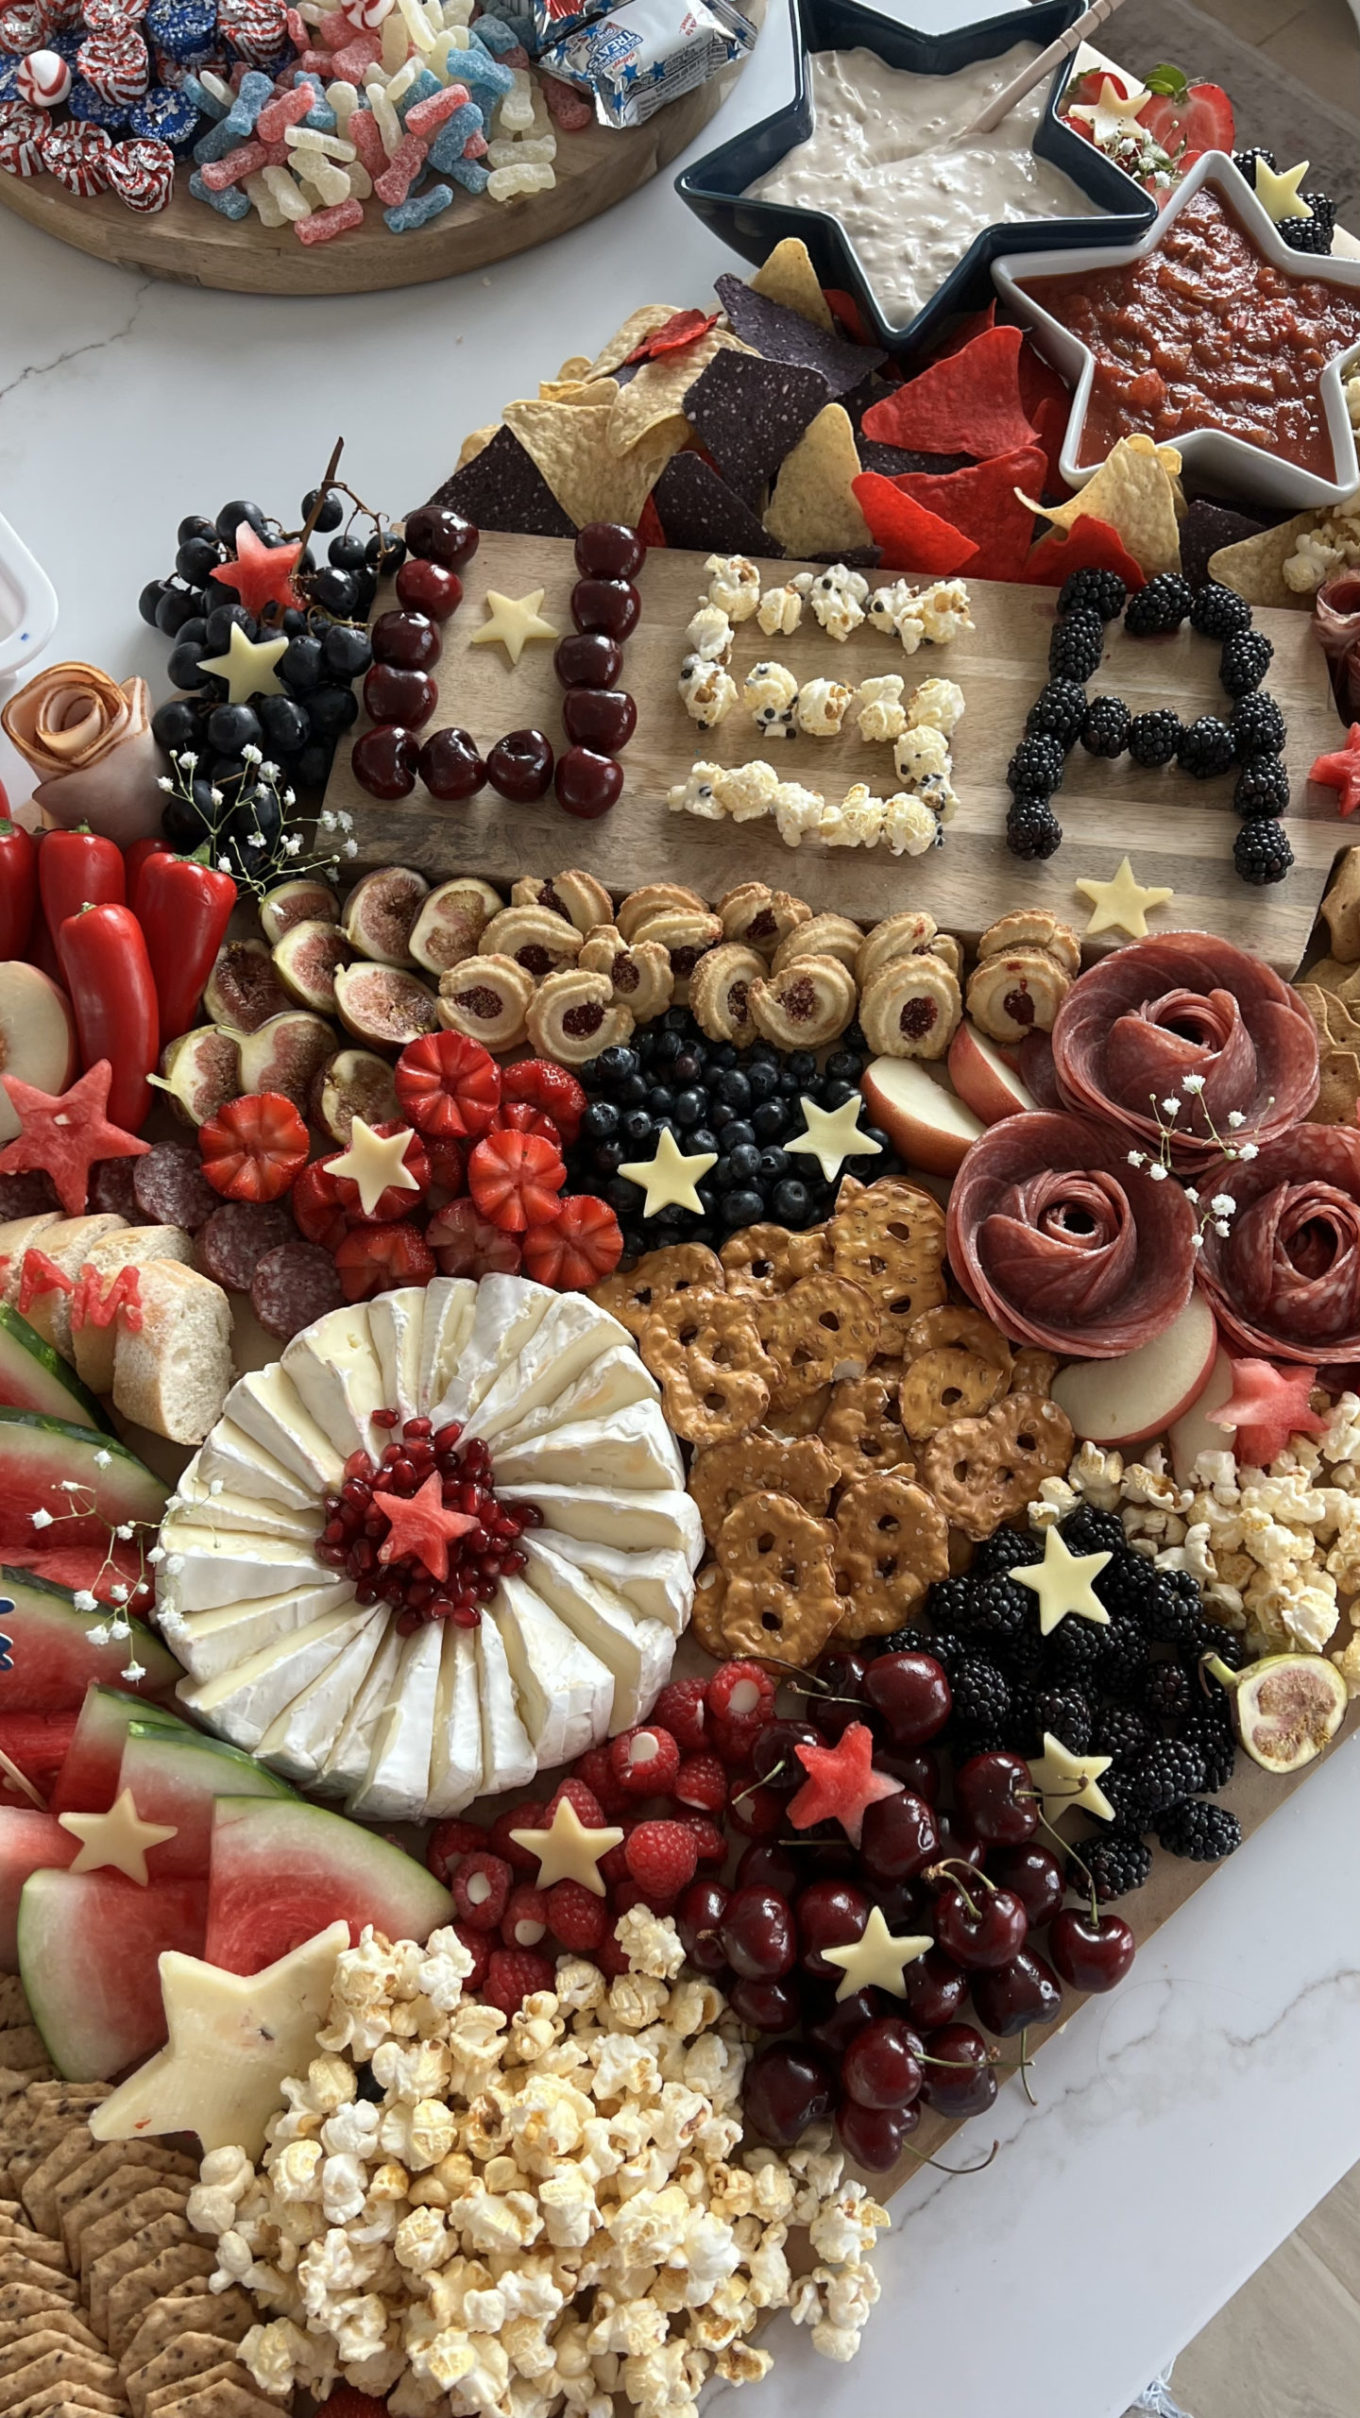 Fourth of July, 5 party hacks, 4th of July party, festive fruit, verisimilitude coordinated fruit, charcuterie spread, party spread, charcuterie board, Sams club, 4th of July, 4th of July charcuterie board